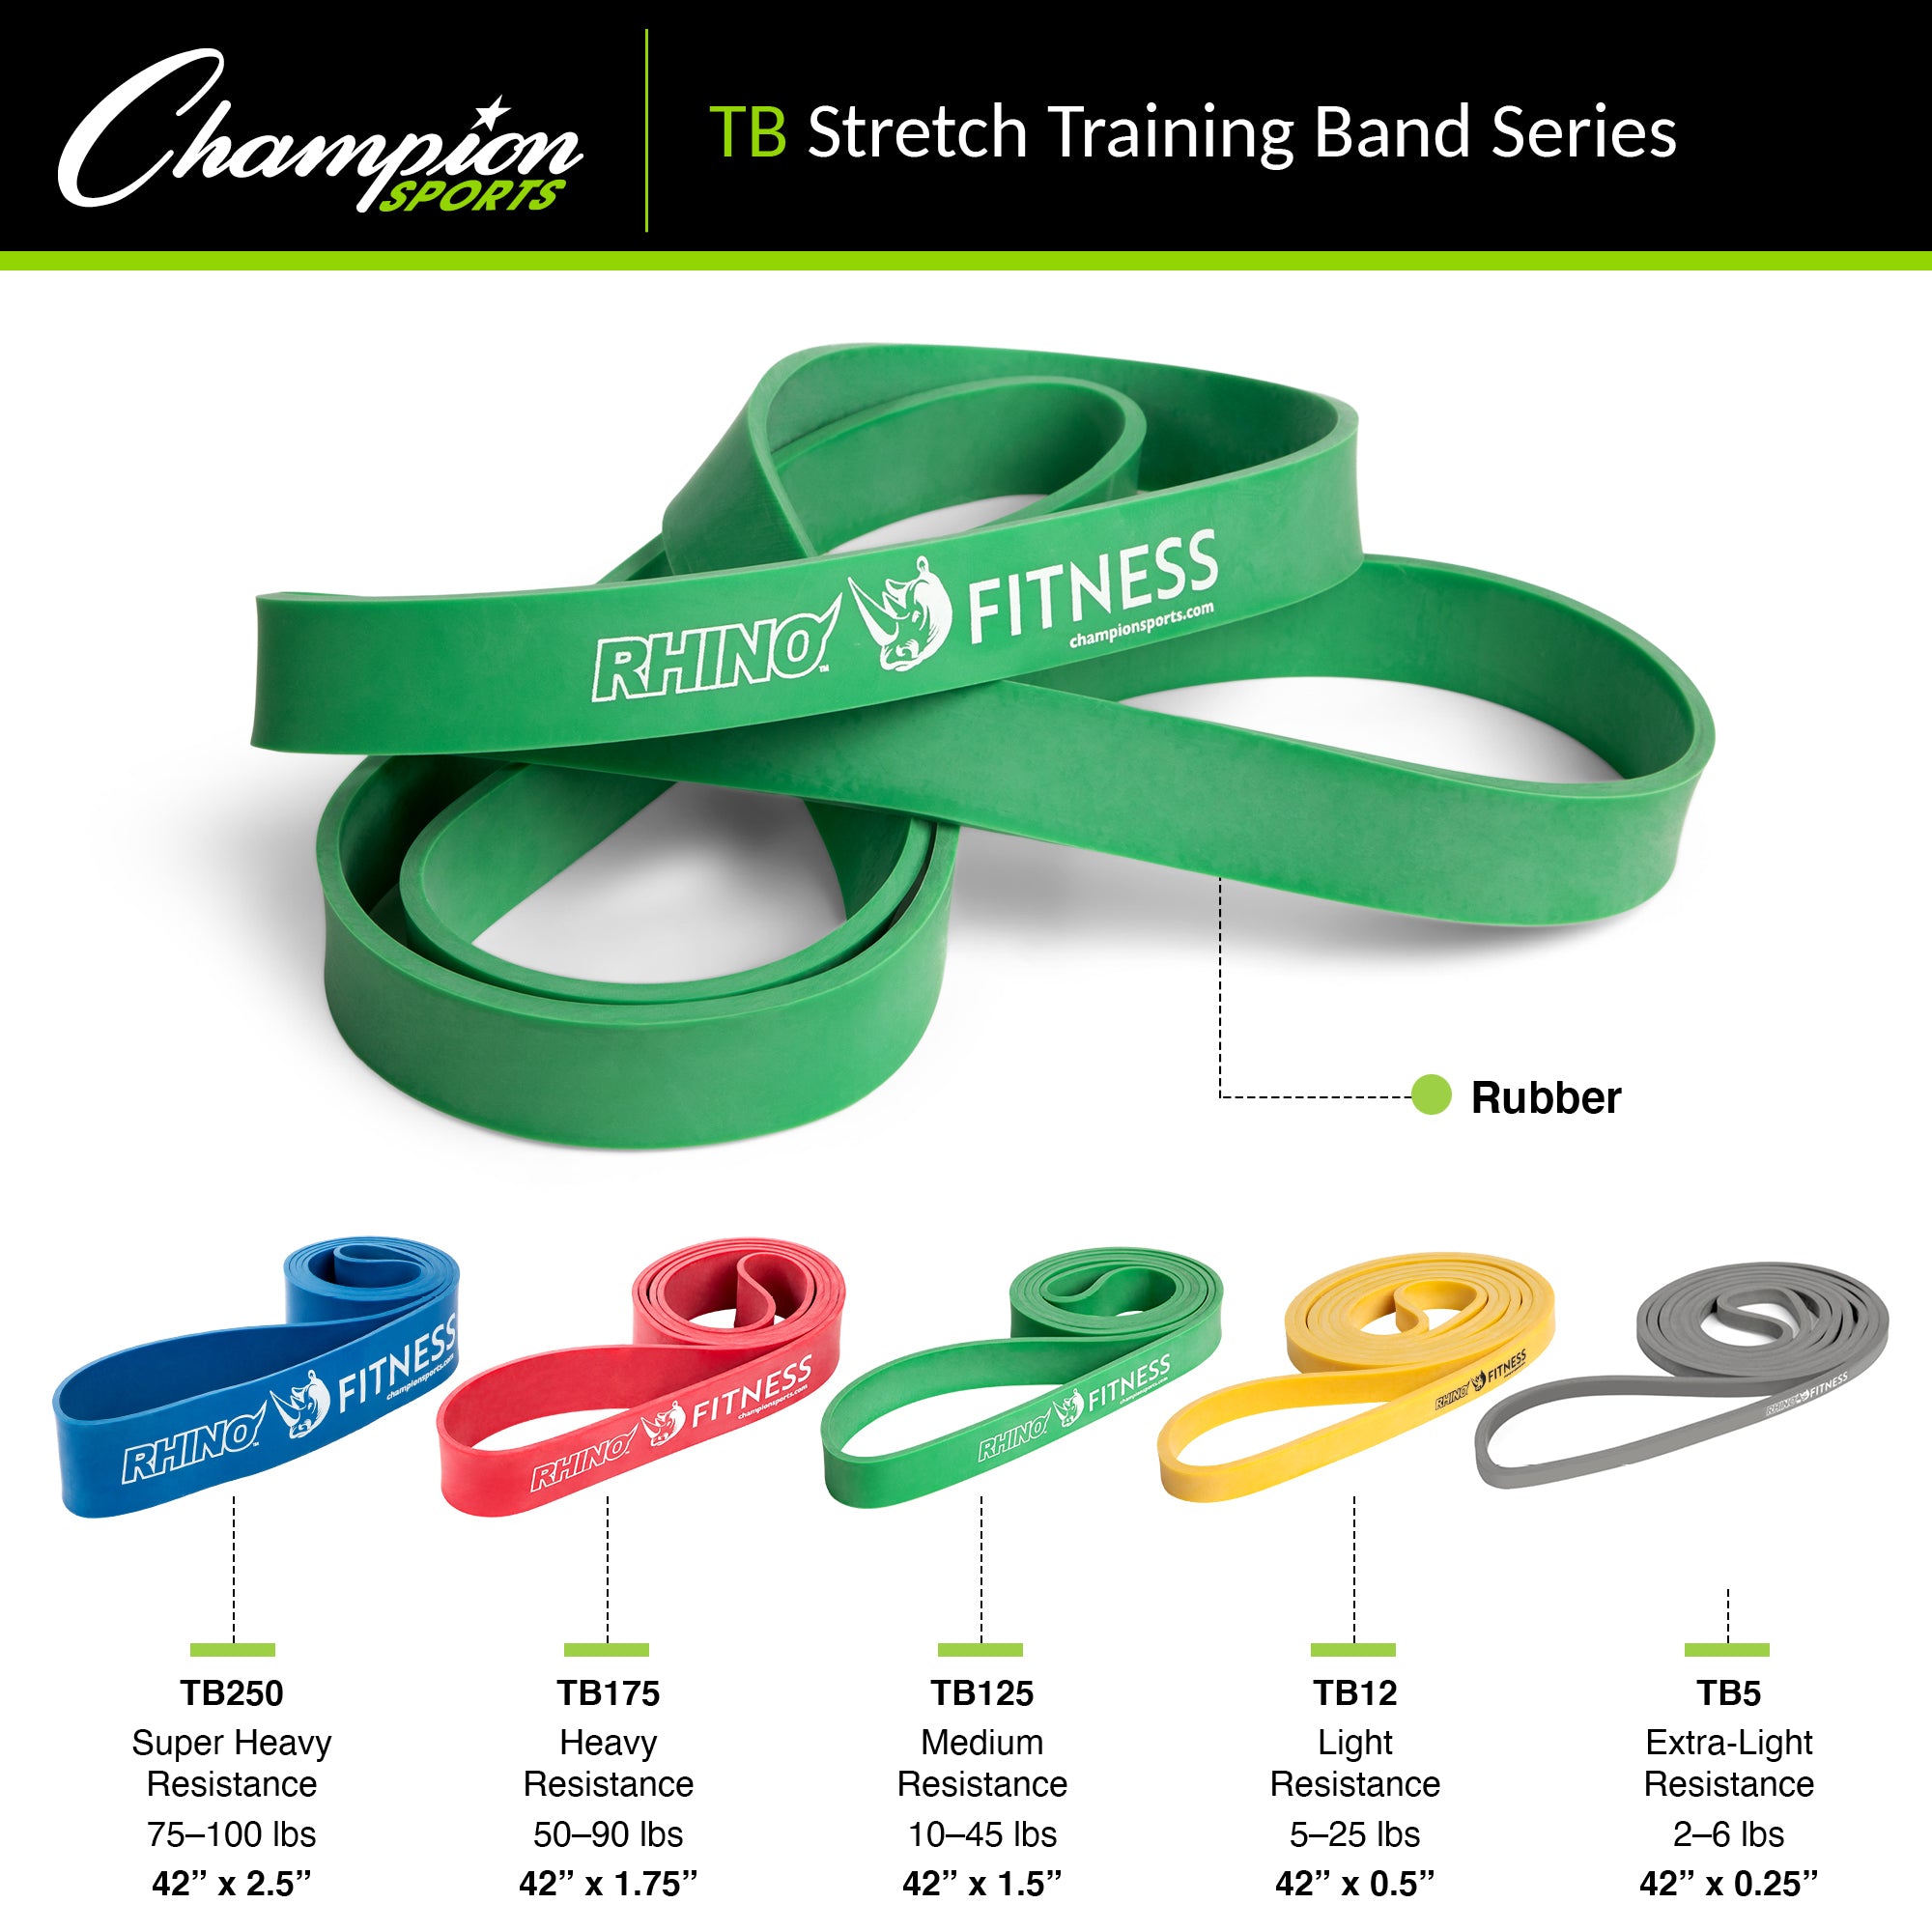 RHINO Fitness® Stretch Resistance-Training Band Series RHINO Fitness fitness loop physical therapy Resistance Training